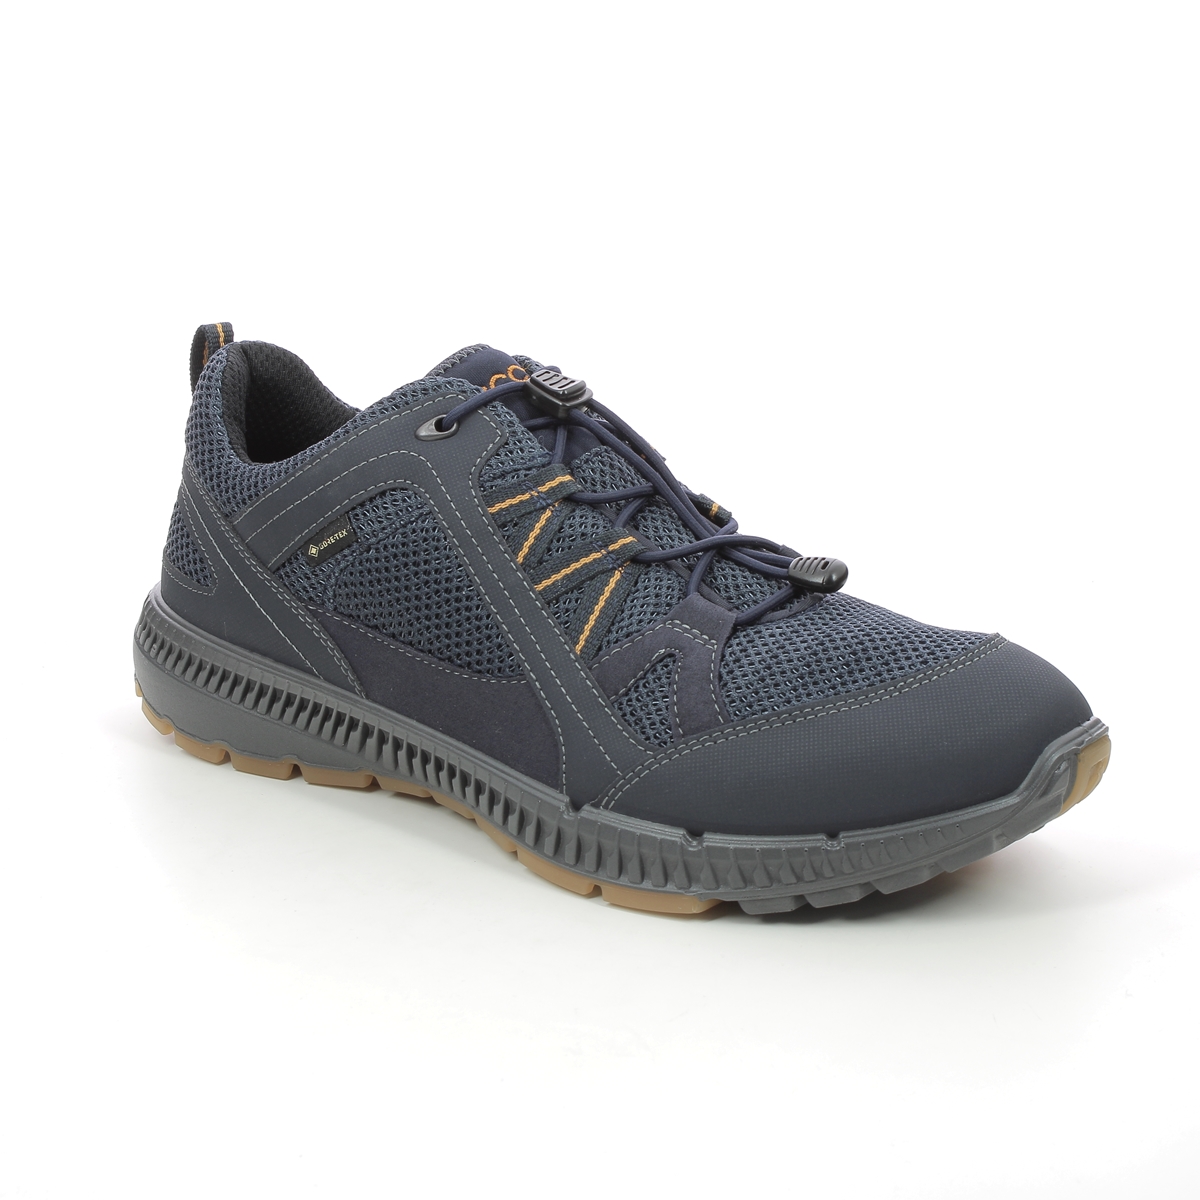 Ecco Terracruise Gtx Navy Mens Trainers 843064-51241 In Size 41 In Plain Navy